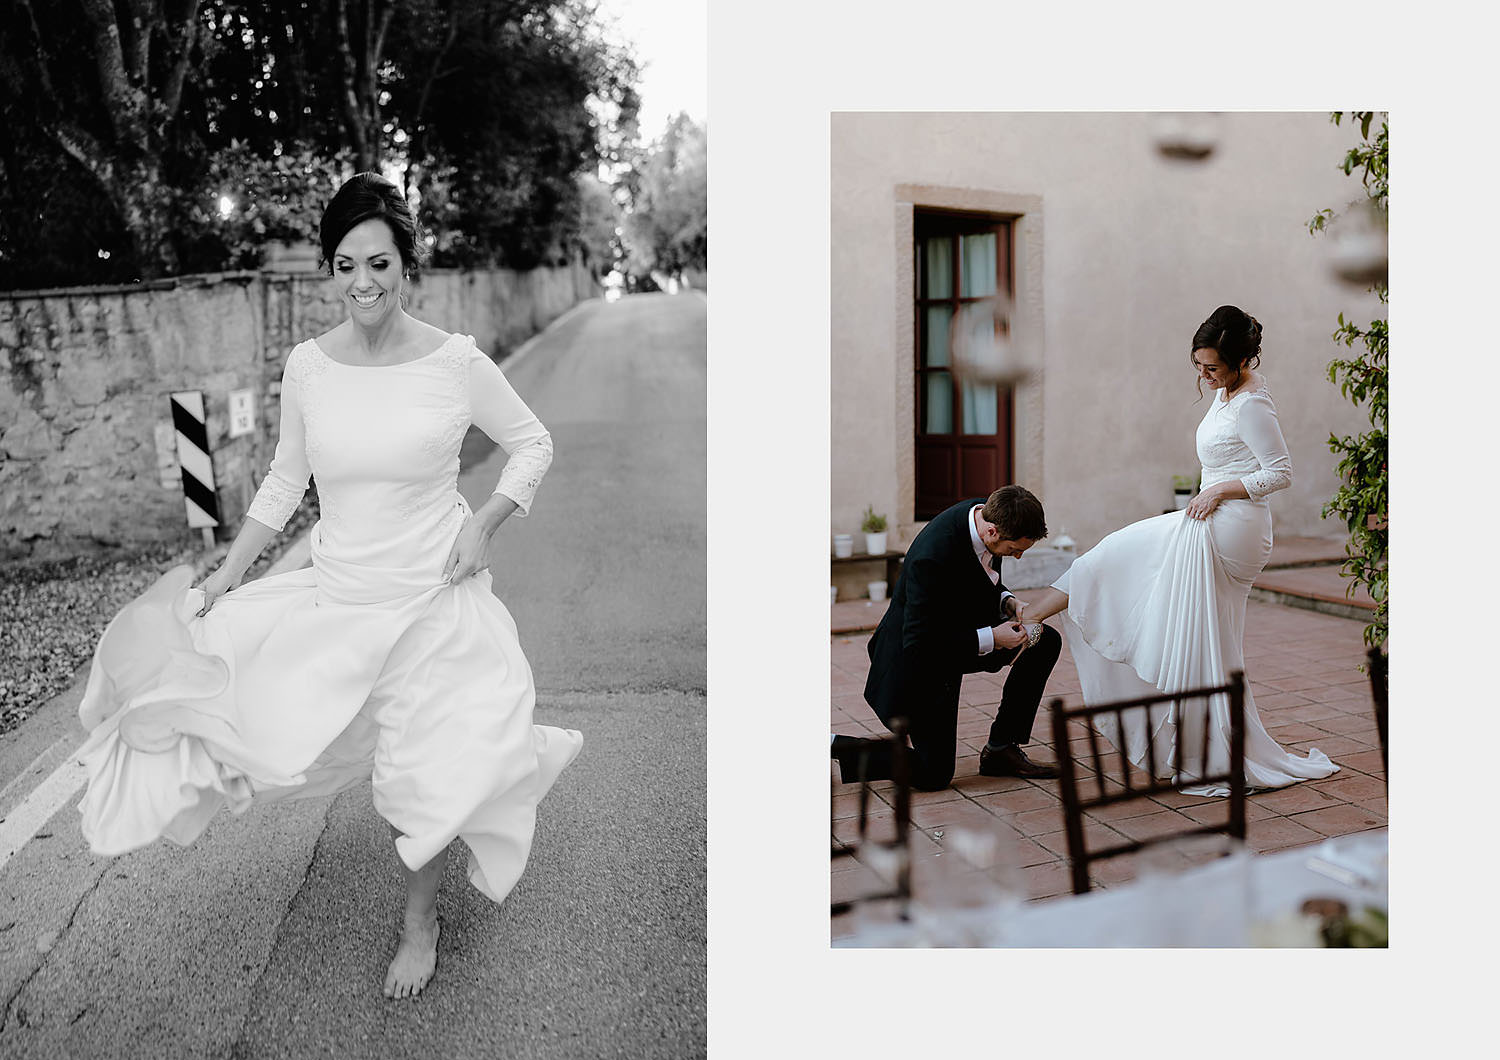 relaxing countryside wedding in tuscany intimate romantic untouched couple portrait